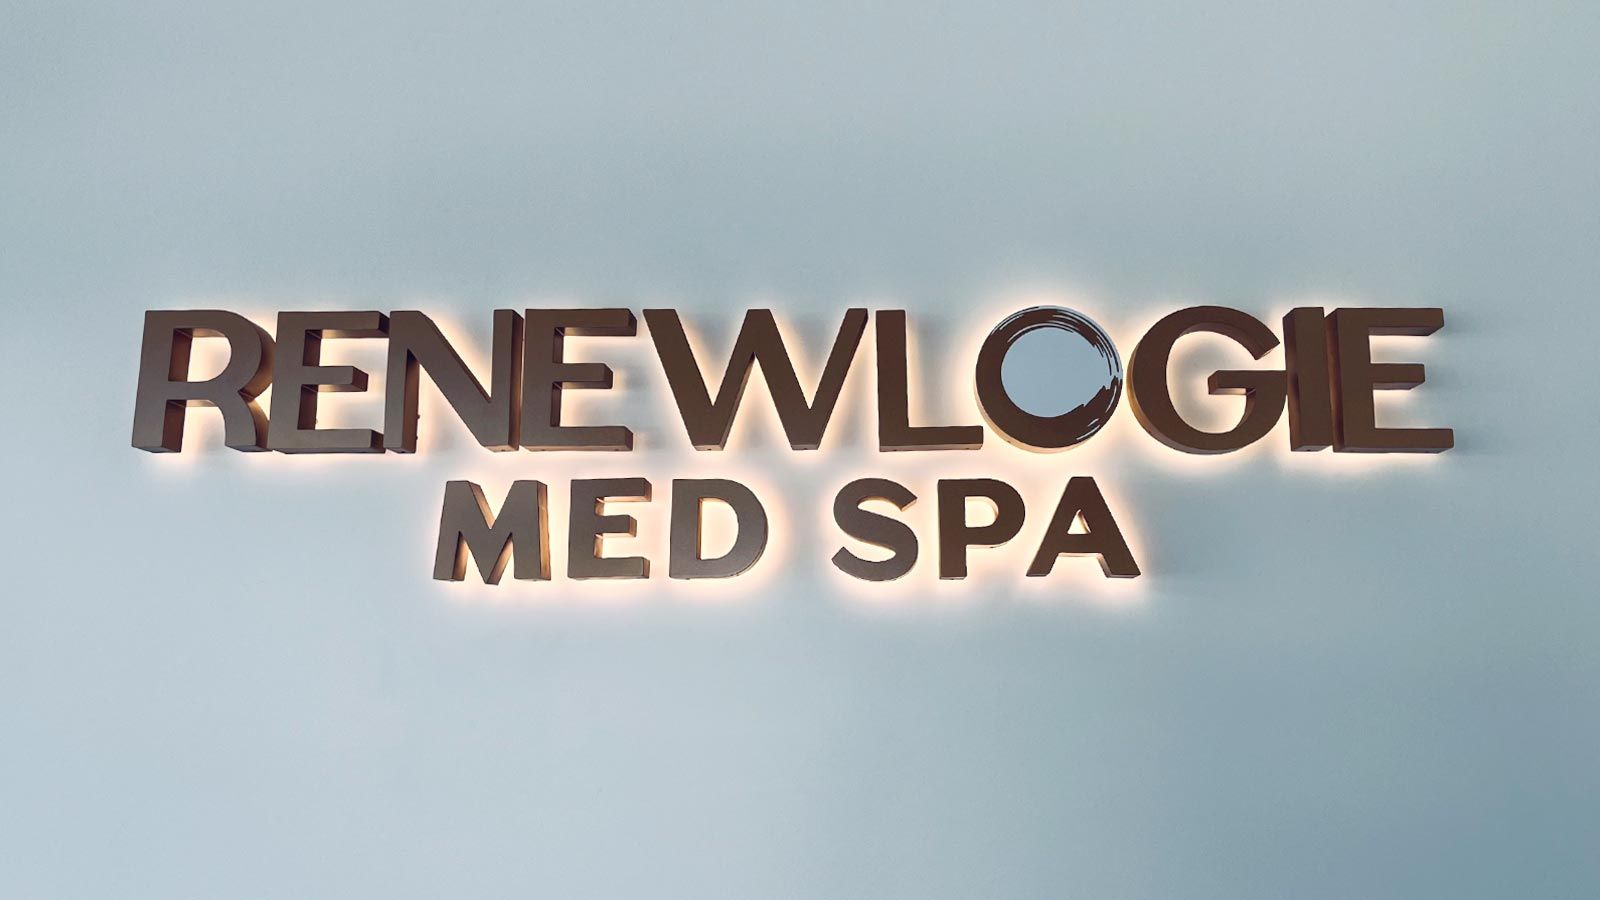 Renewlogie Med Spa backlit letters mounted to the wall